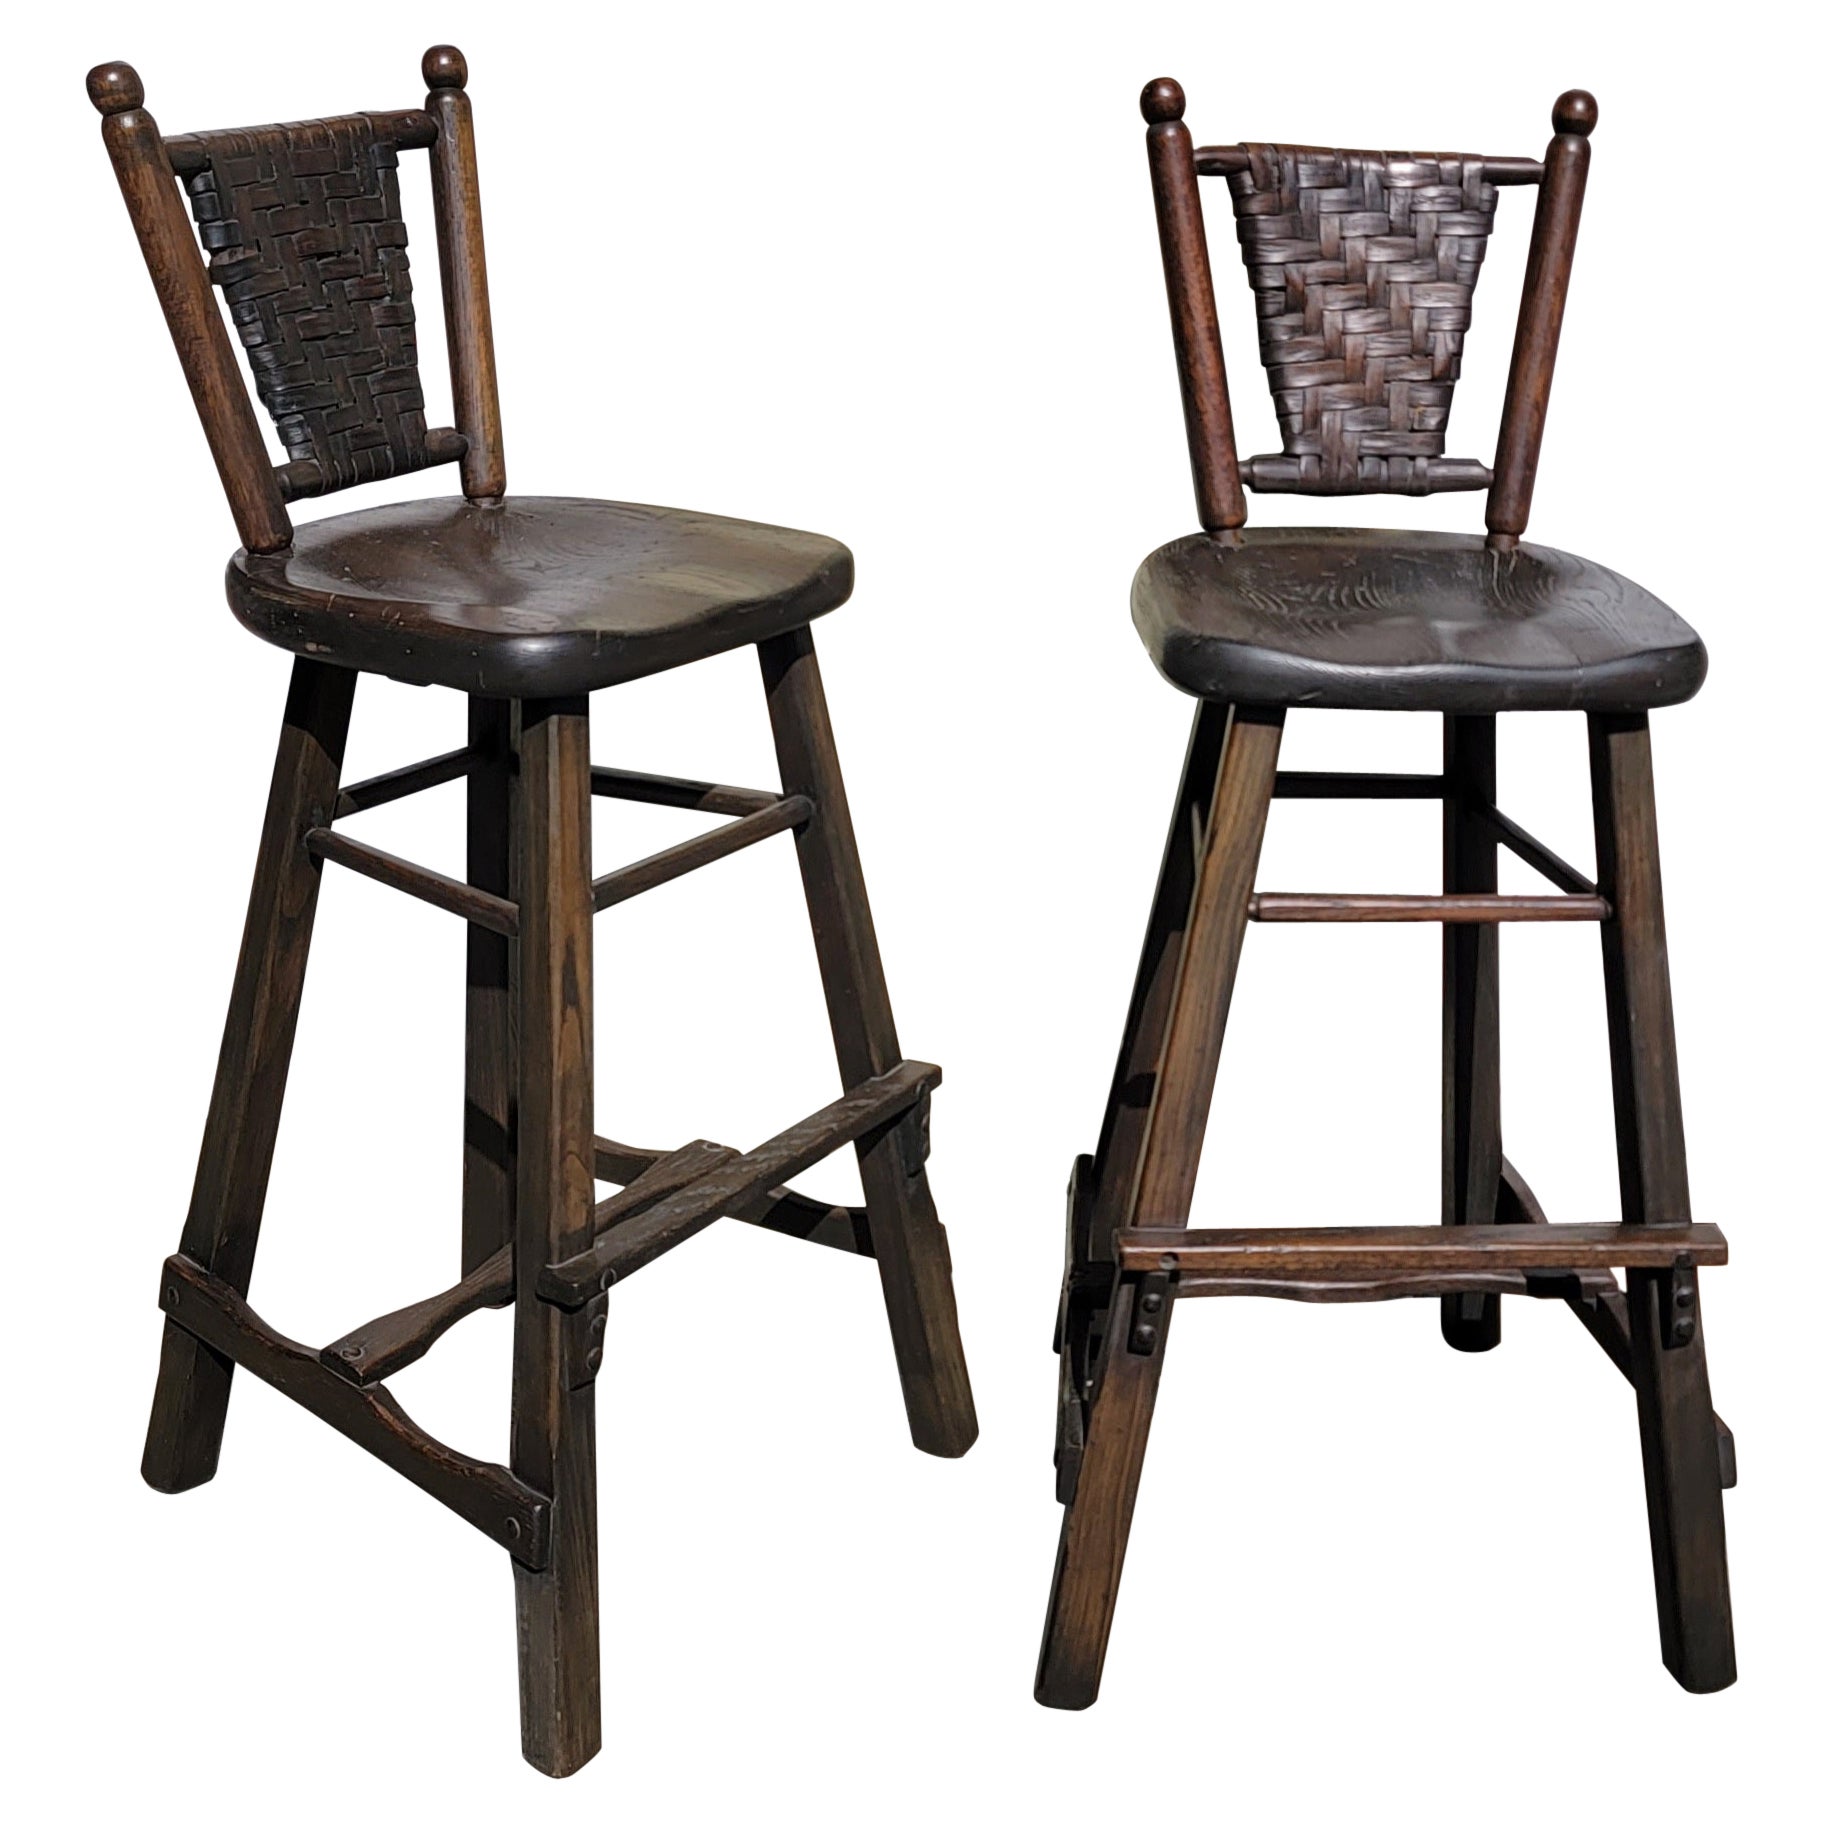 Pair of Signed Old Hickory Bar Stools